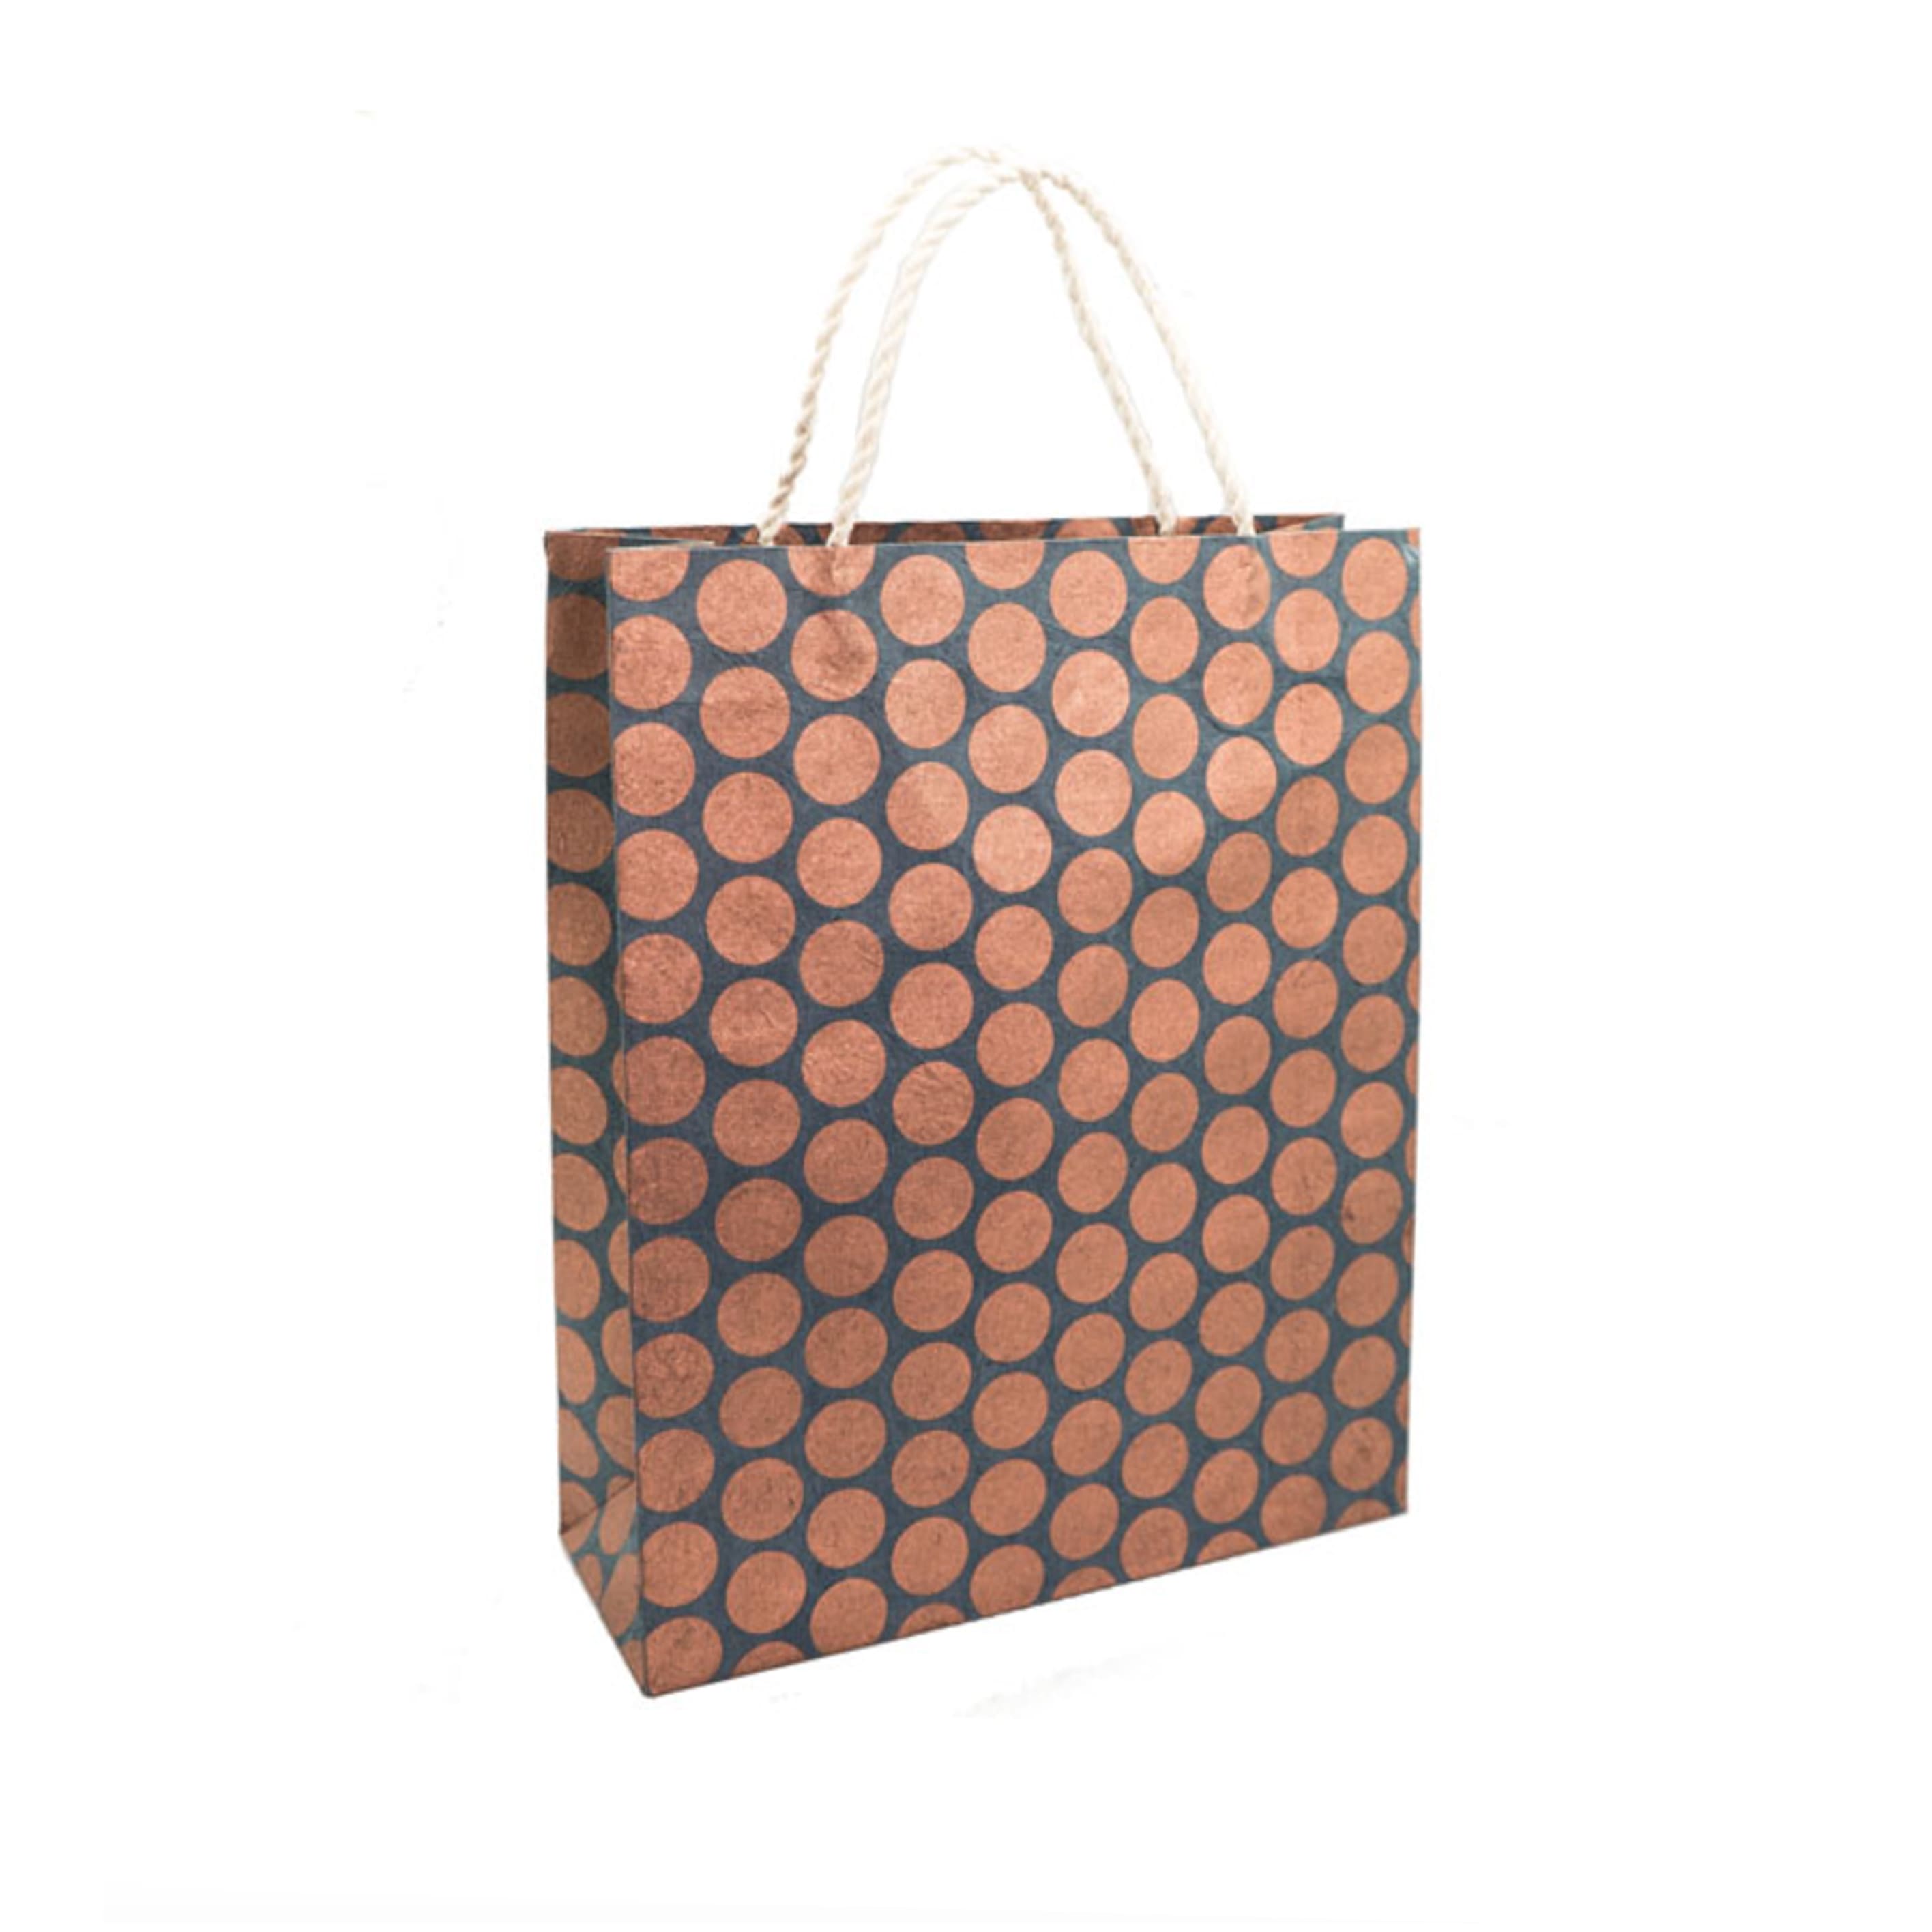 Gift Bags | Polka Dot | Copper on Navy Blue | 2 SIZE OPTIONS AVAILABLE